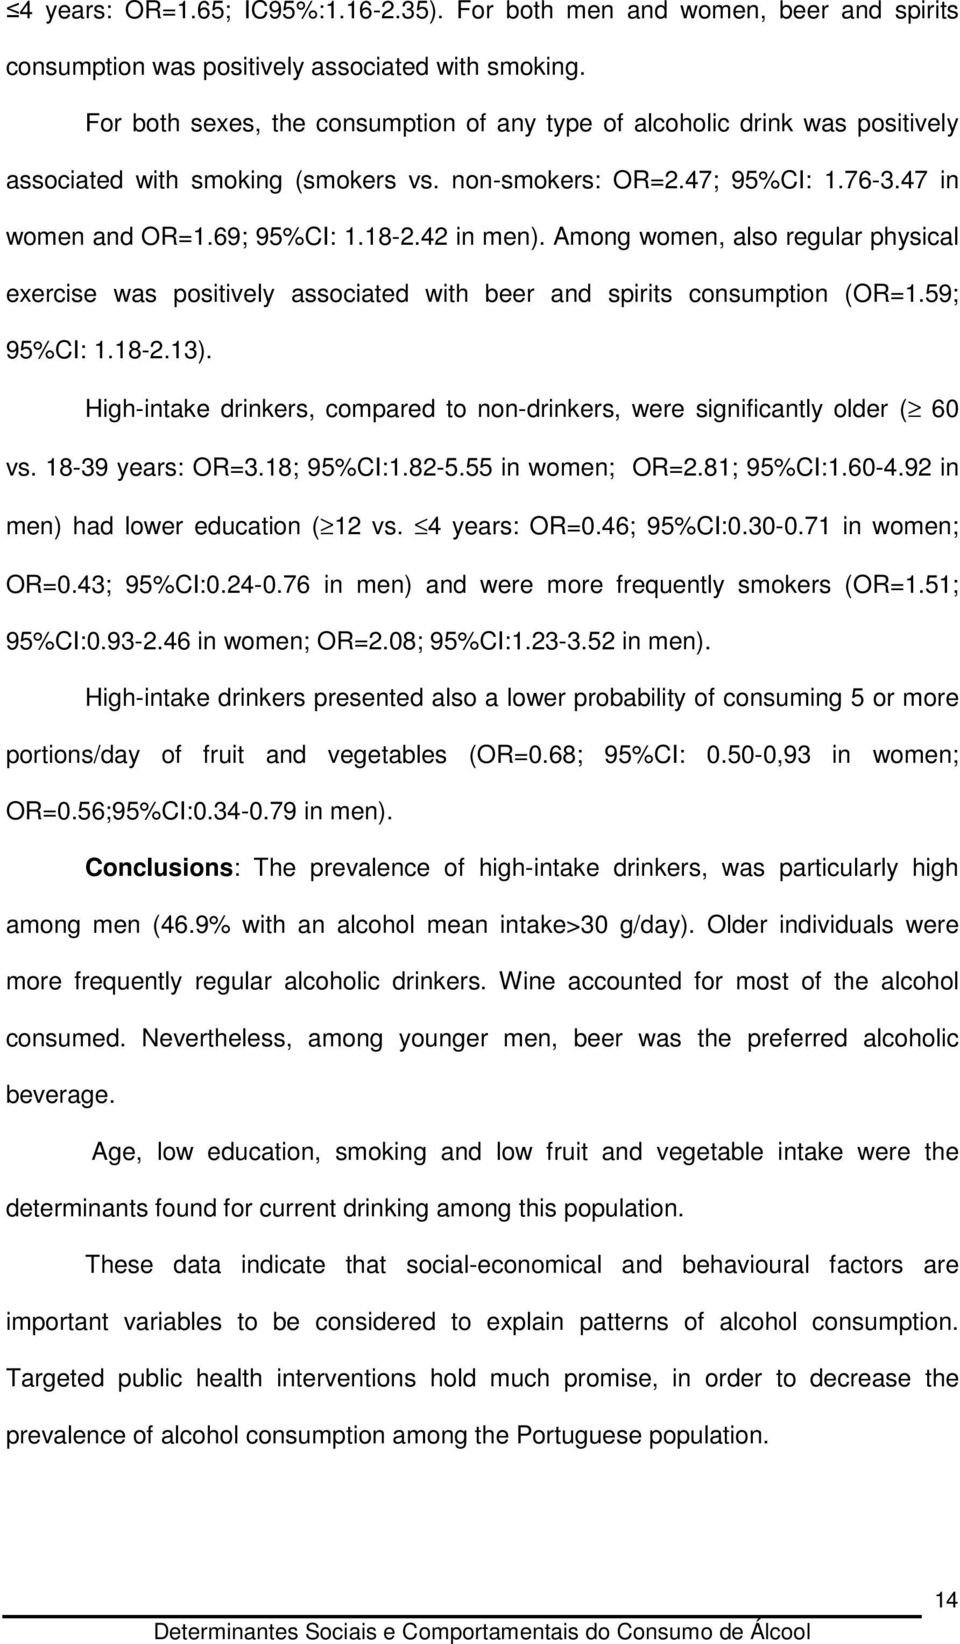 42 in men). Among women, also regular physical exercise was positively associated with beer and spirits consumption (OR=1.59; 95%CI: 1.18-2.13).